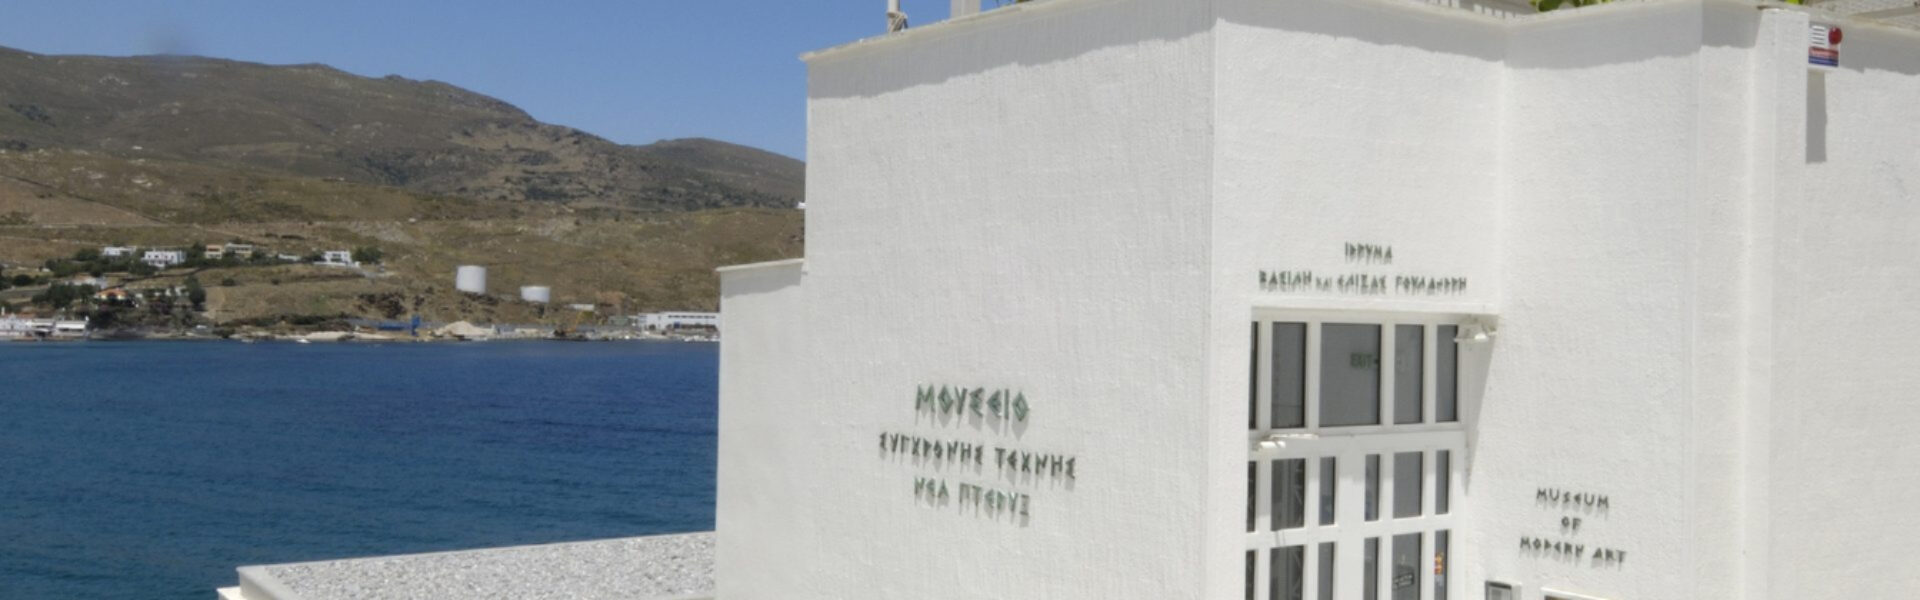 Andros-Visit-Cover-Photo-pn06xexjoqlh60z5lfv8wohhmeqqgife2wg4poaoog